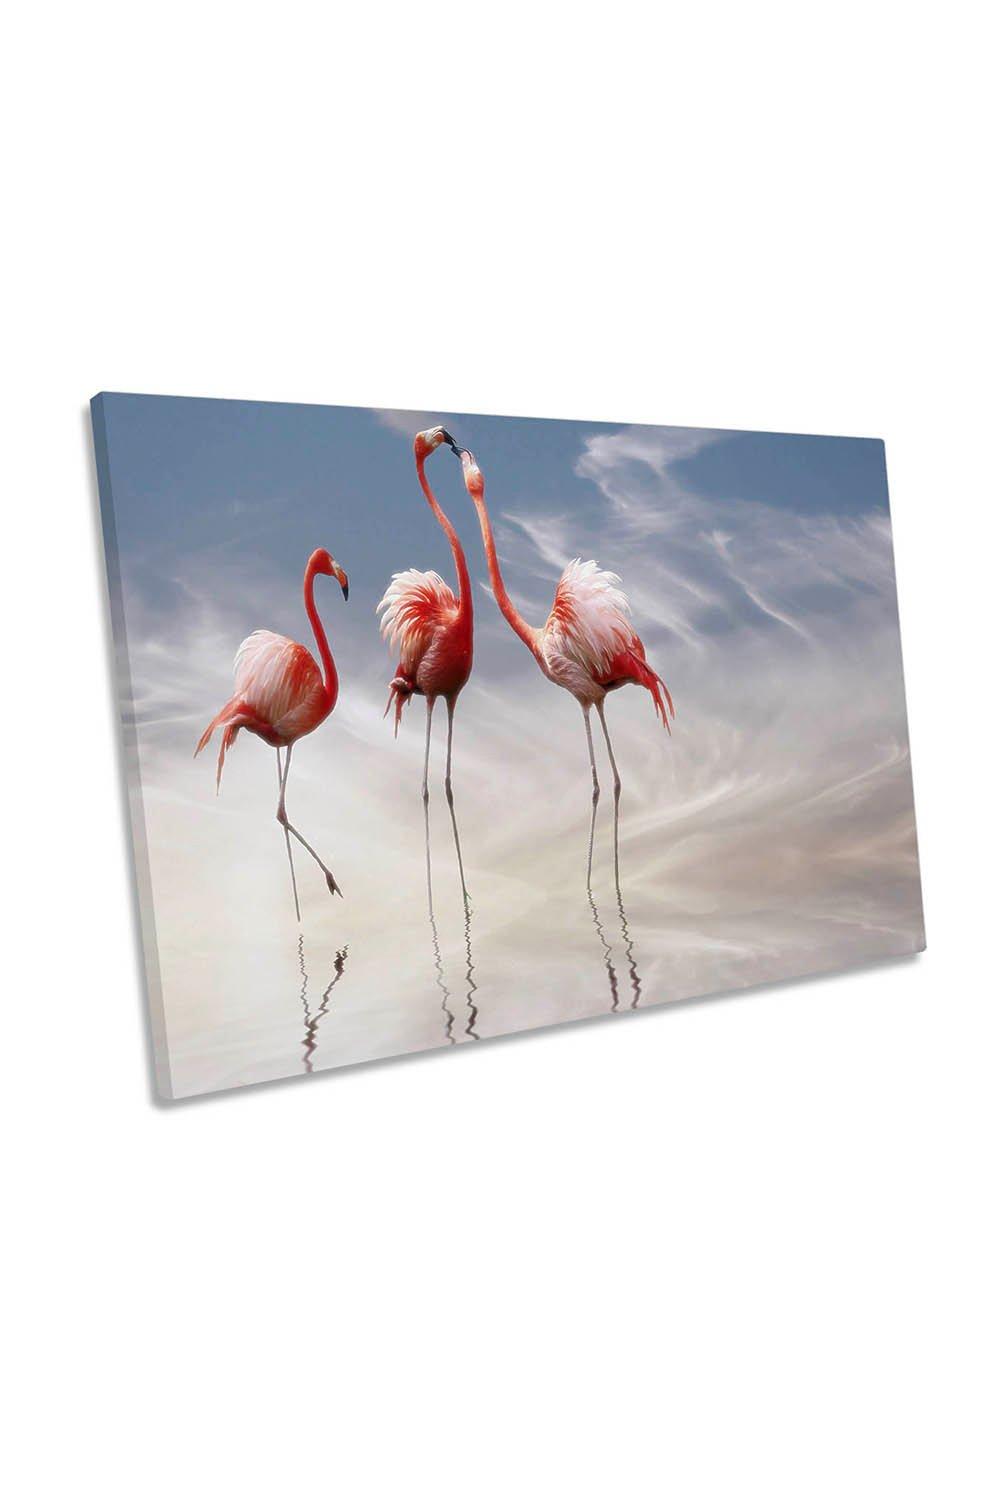 Flamingo Birds in Water Canvas Wall Art Picture Print